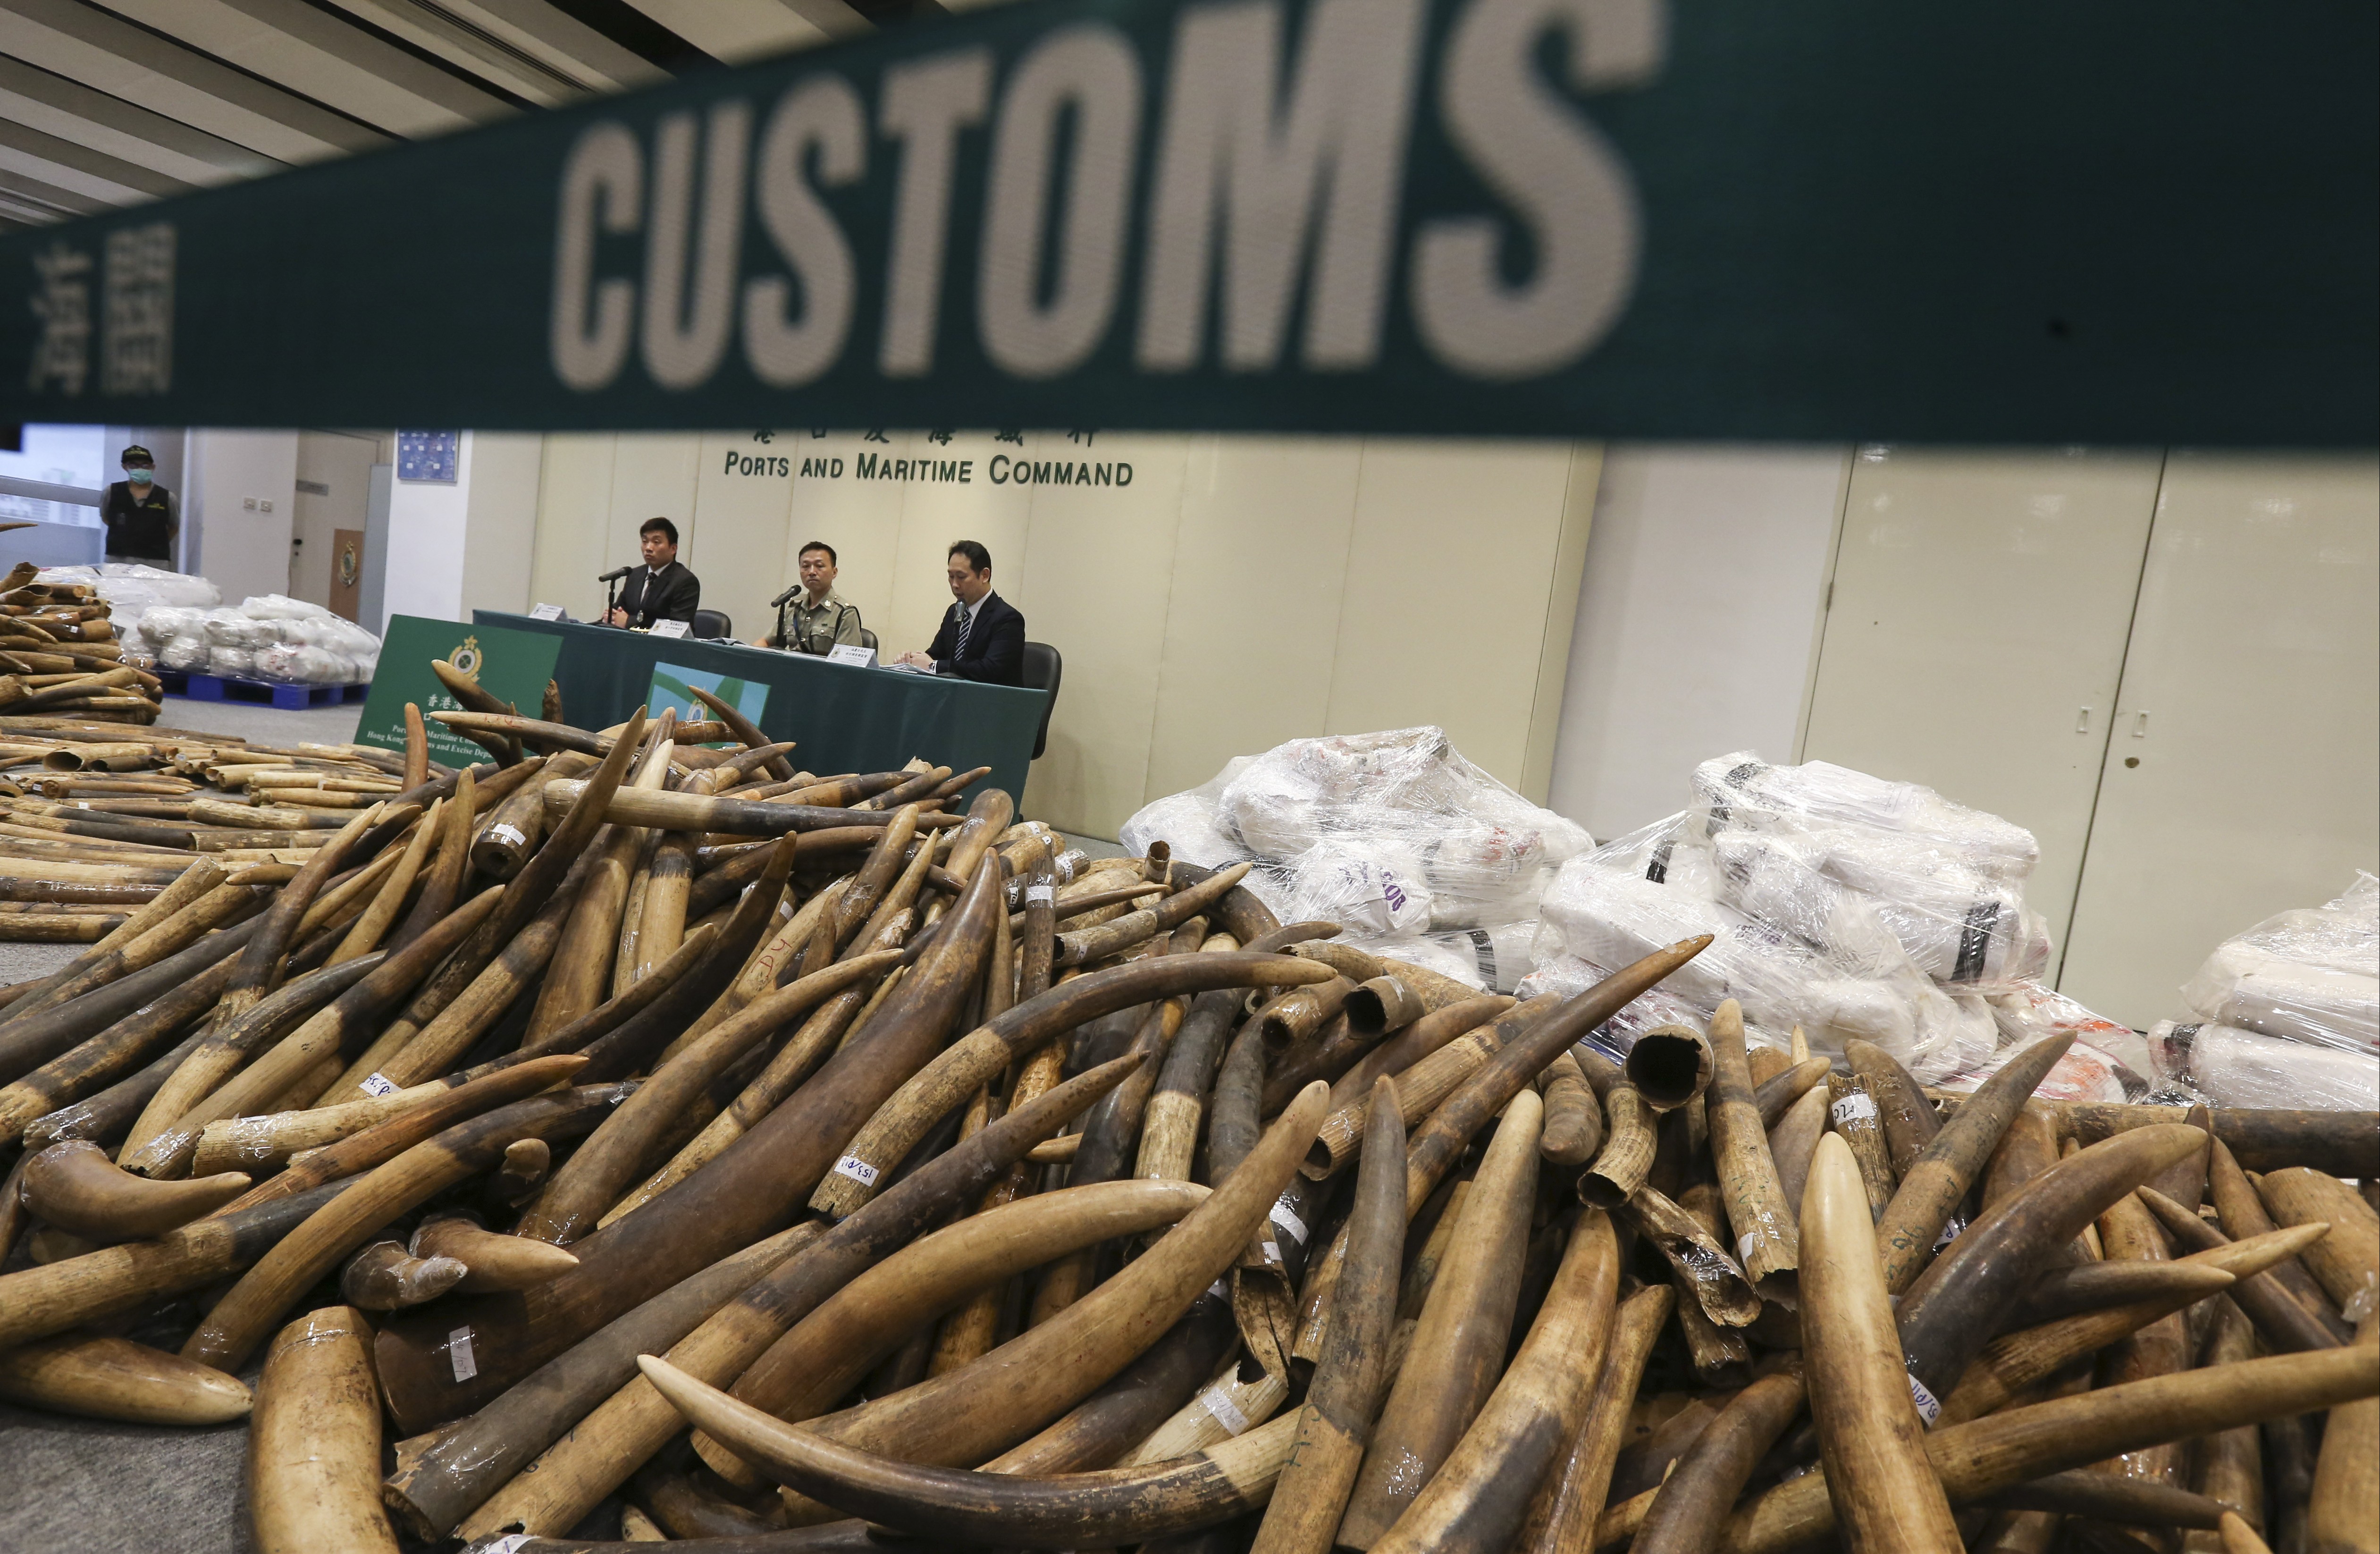 Hong Kong customs found 7.2 tonnes of tusks in a shipment of frozen fish in 2017. Photo: Dickson Lee